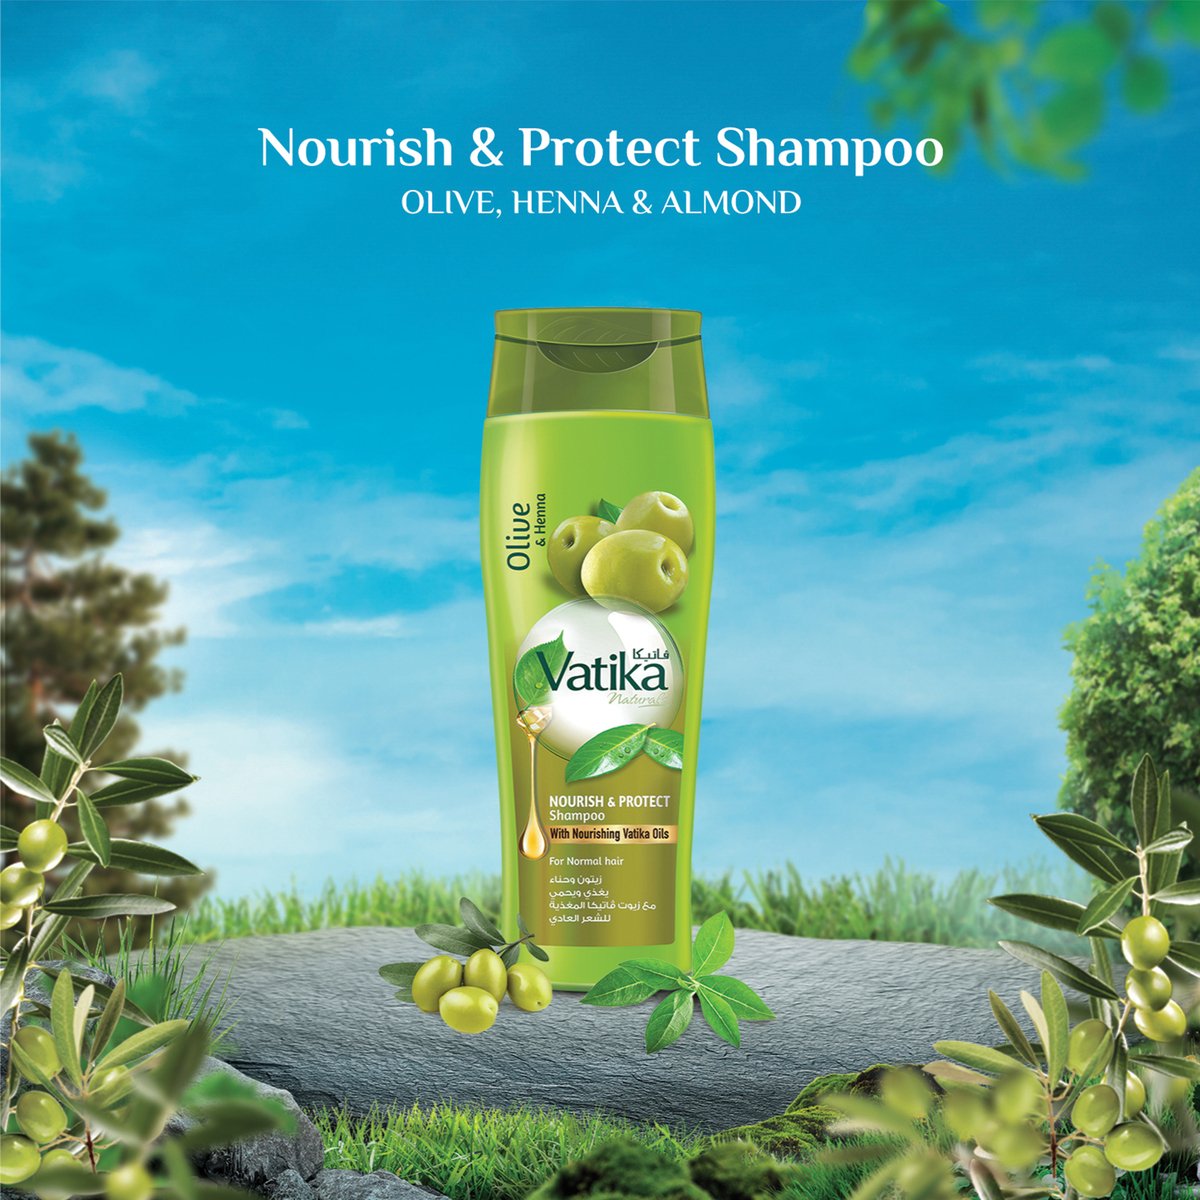 Vatika Naturals Nourish & Protect Shampoo with Natural Extracts Of Olive & Henna For Normal Hair, 400 ml